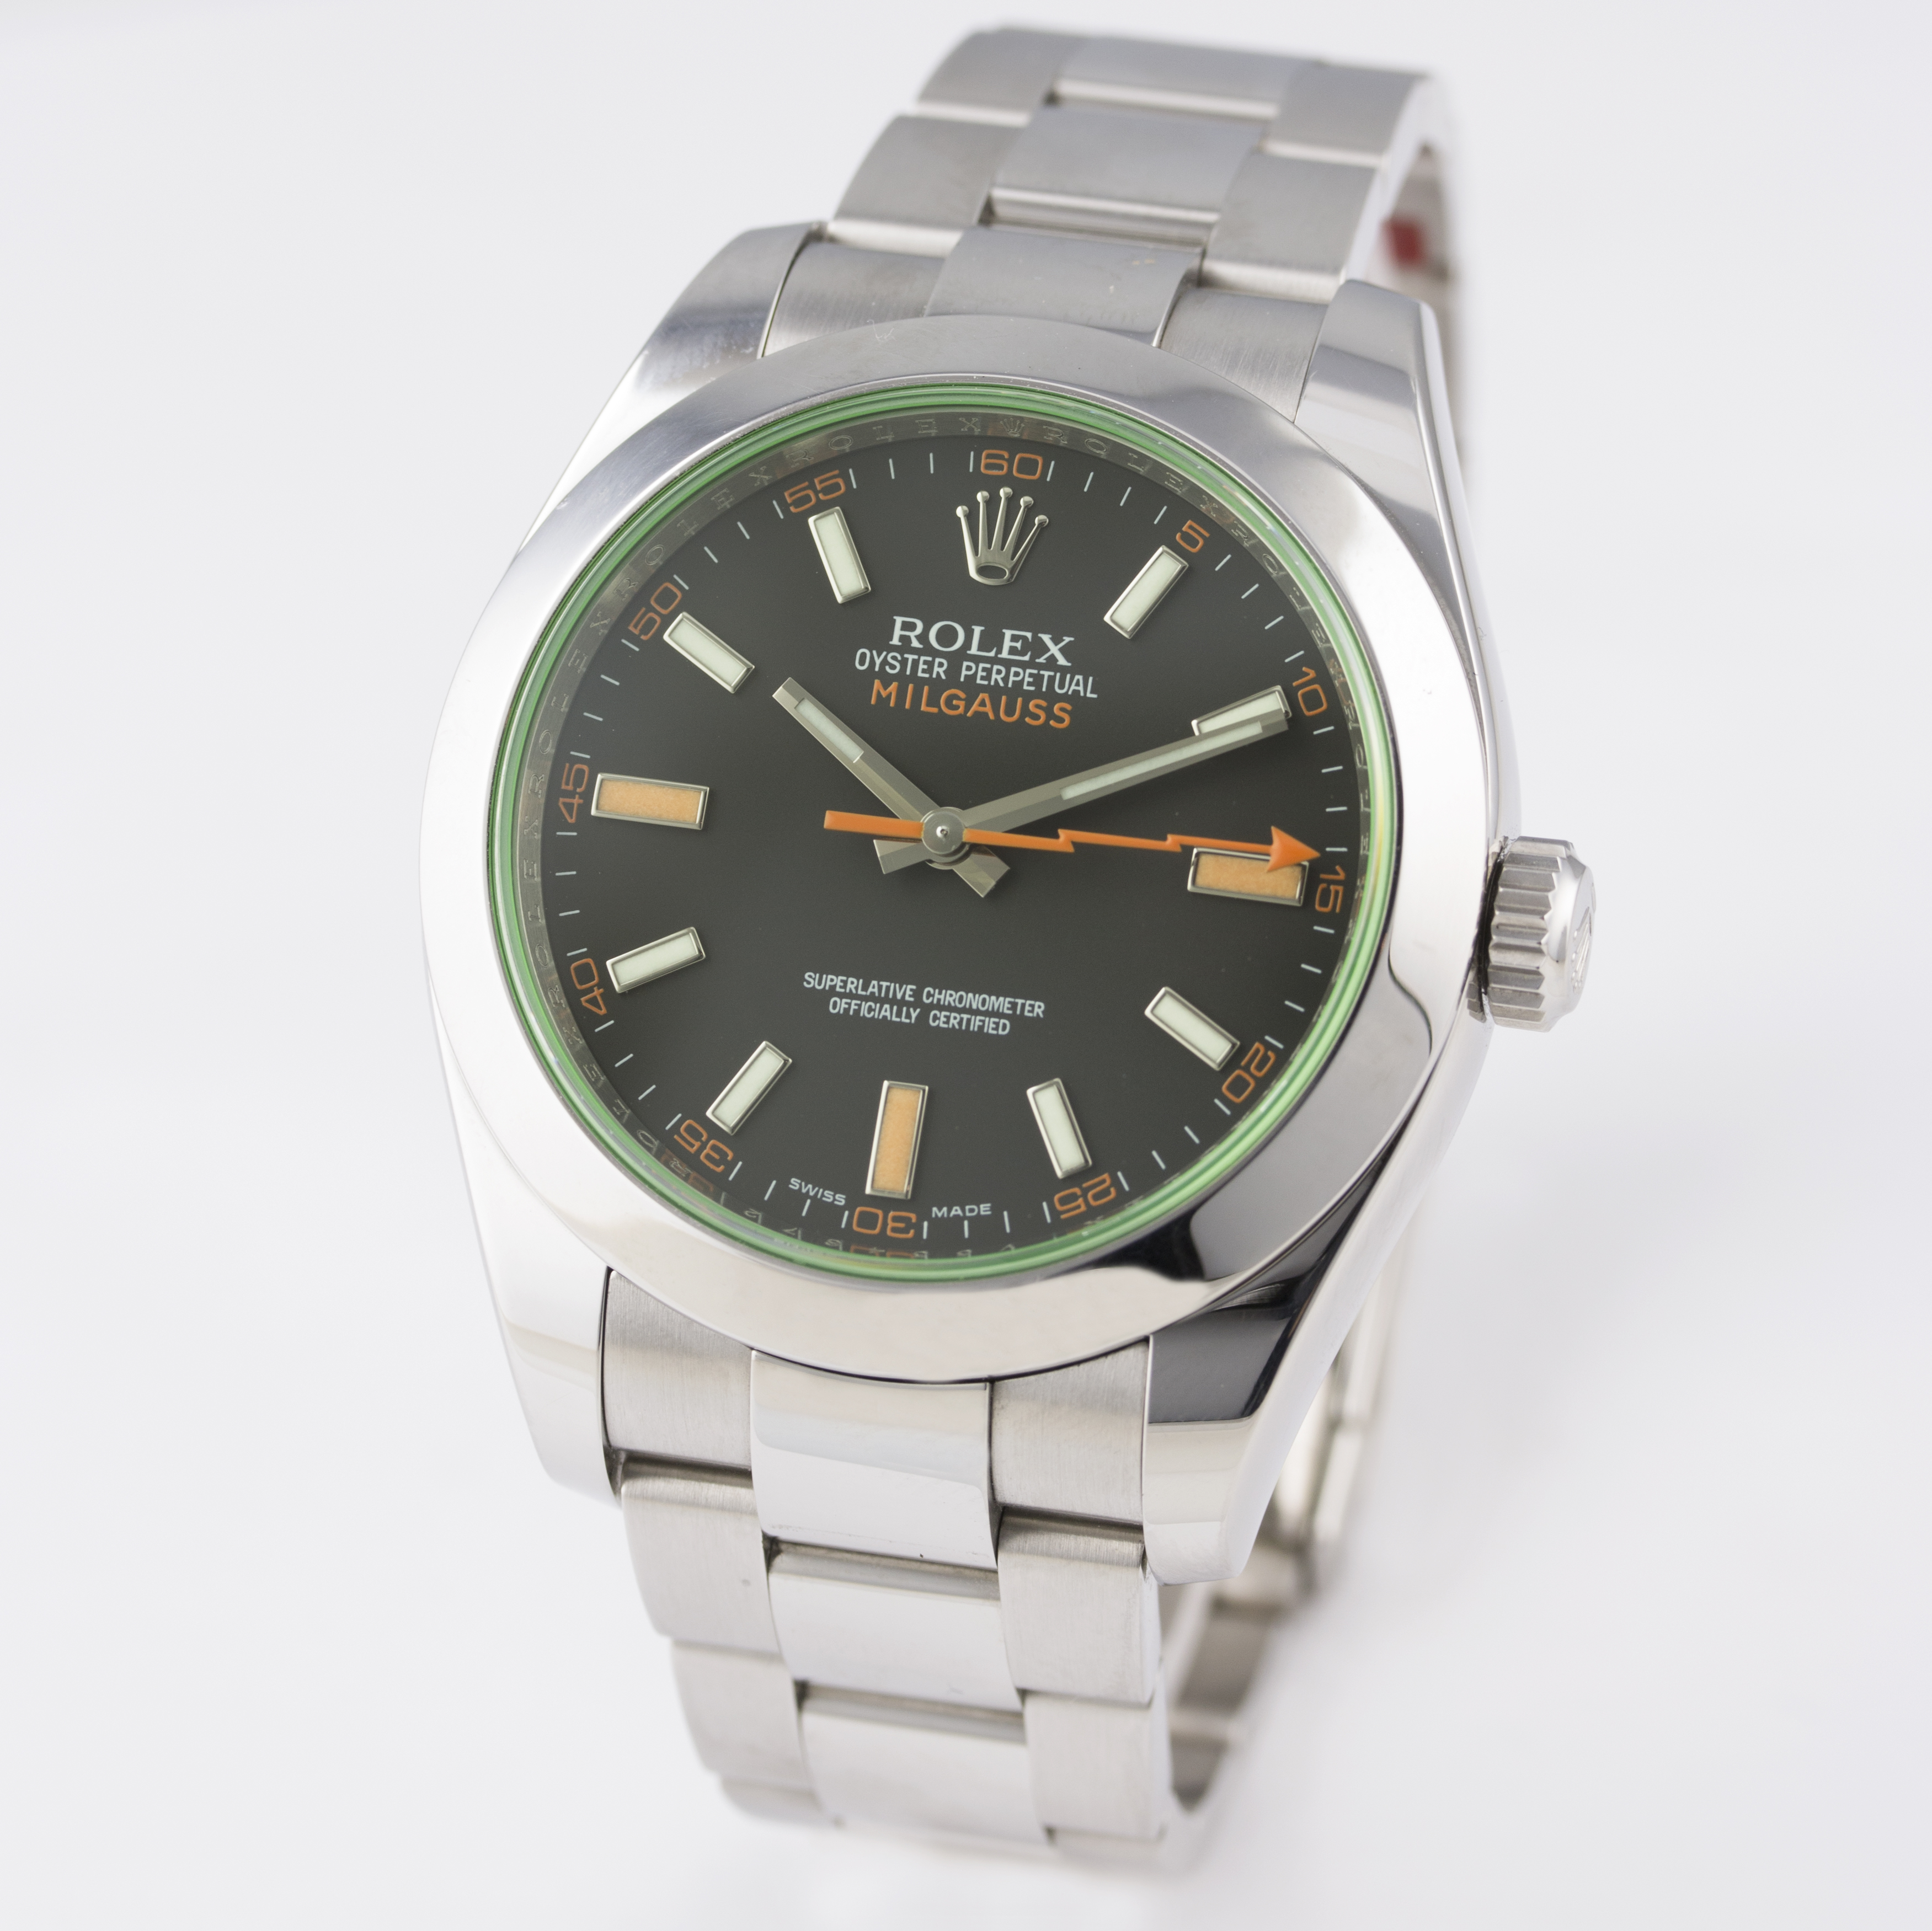 A GENTLEMAN'S STAINLESS STEEL ROLEX OYSTER PERPETUAL "GREEN GLASS" MILGAUSS BRACELET WATCH DATED - Image 2 of 6